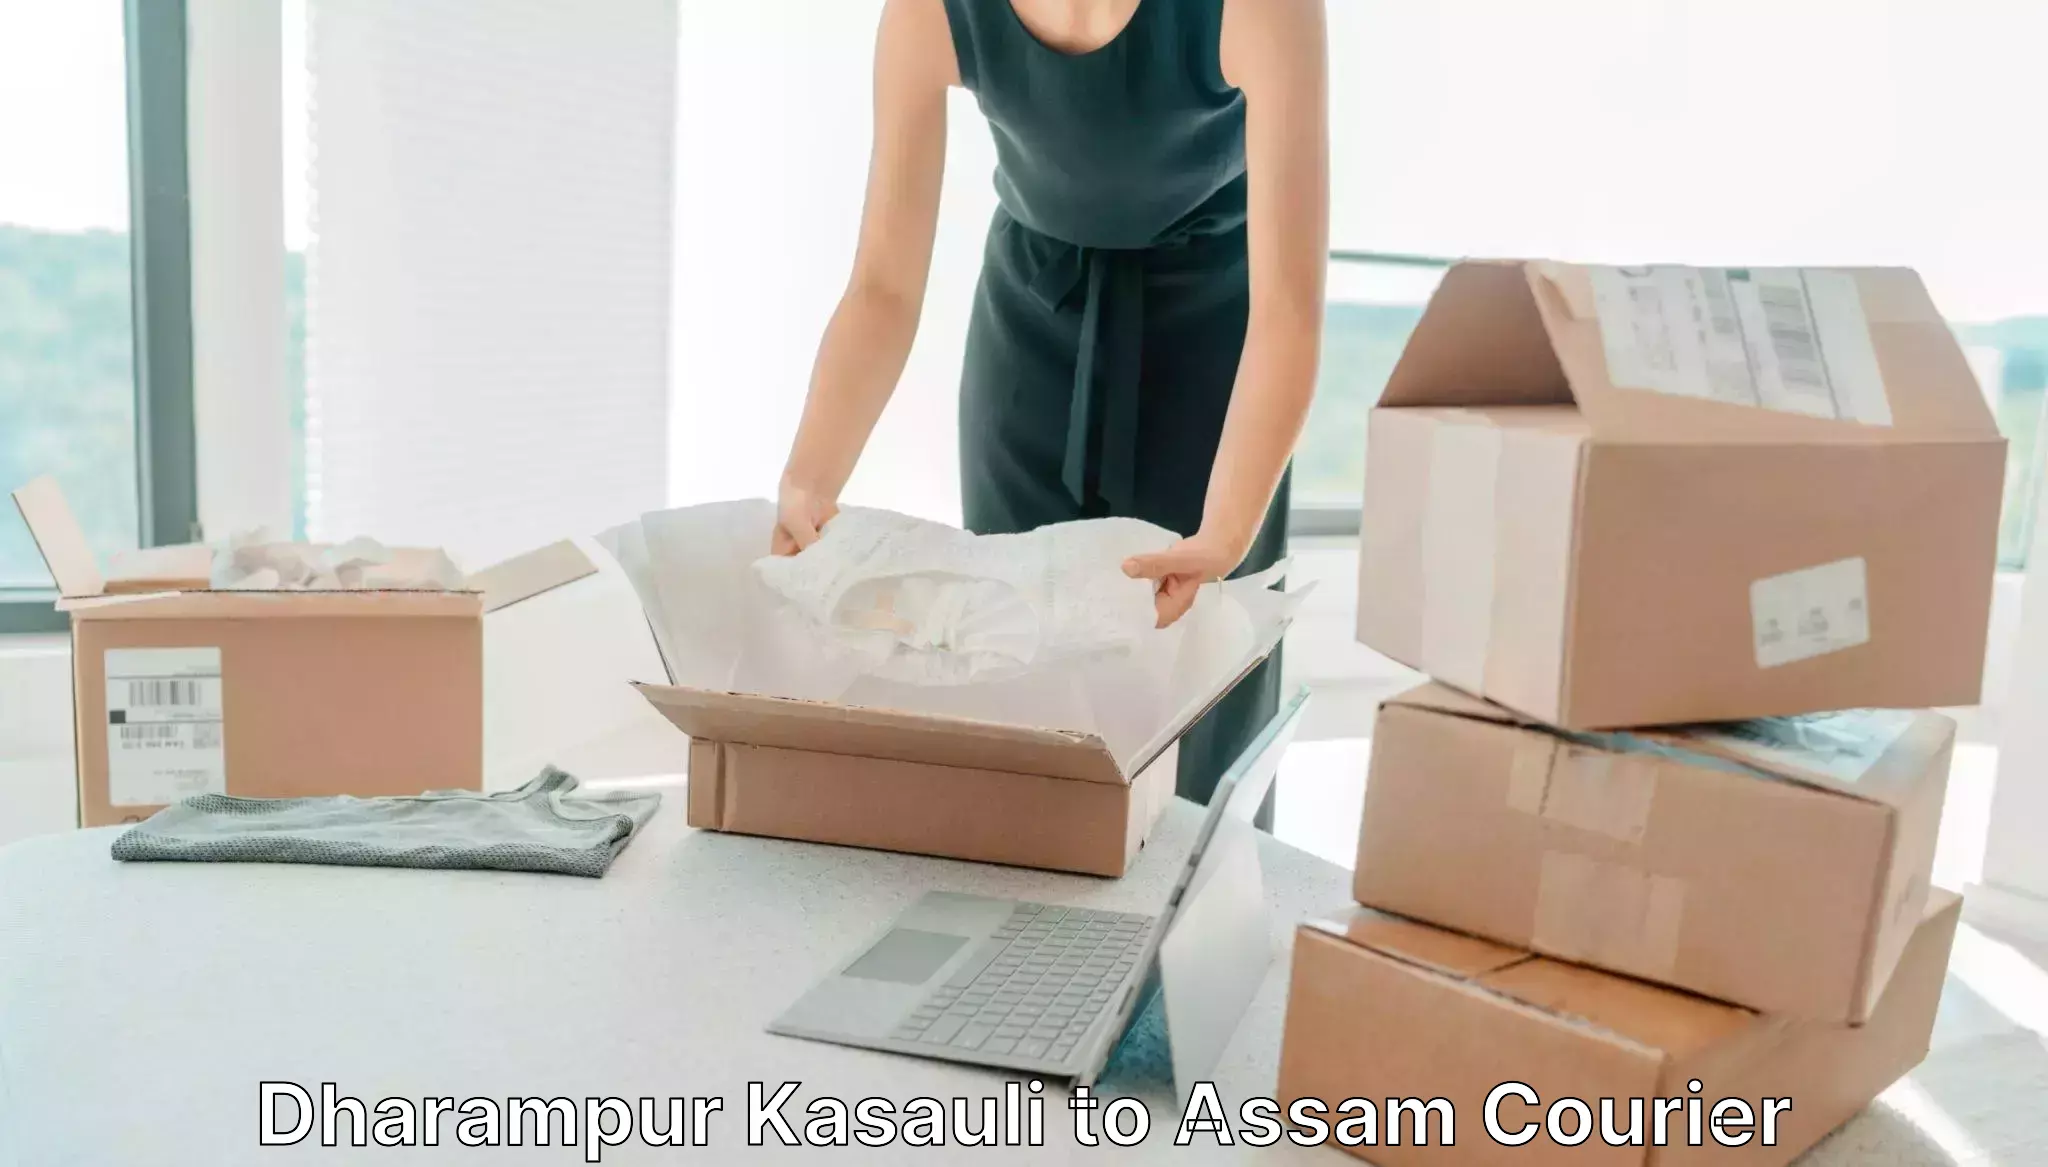 Courier dispatch services Dharampur Kasauli to Rupai Siding